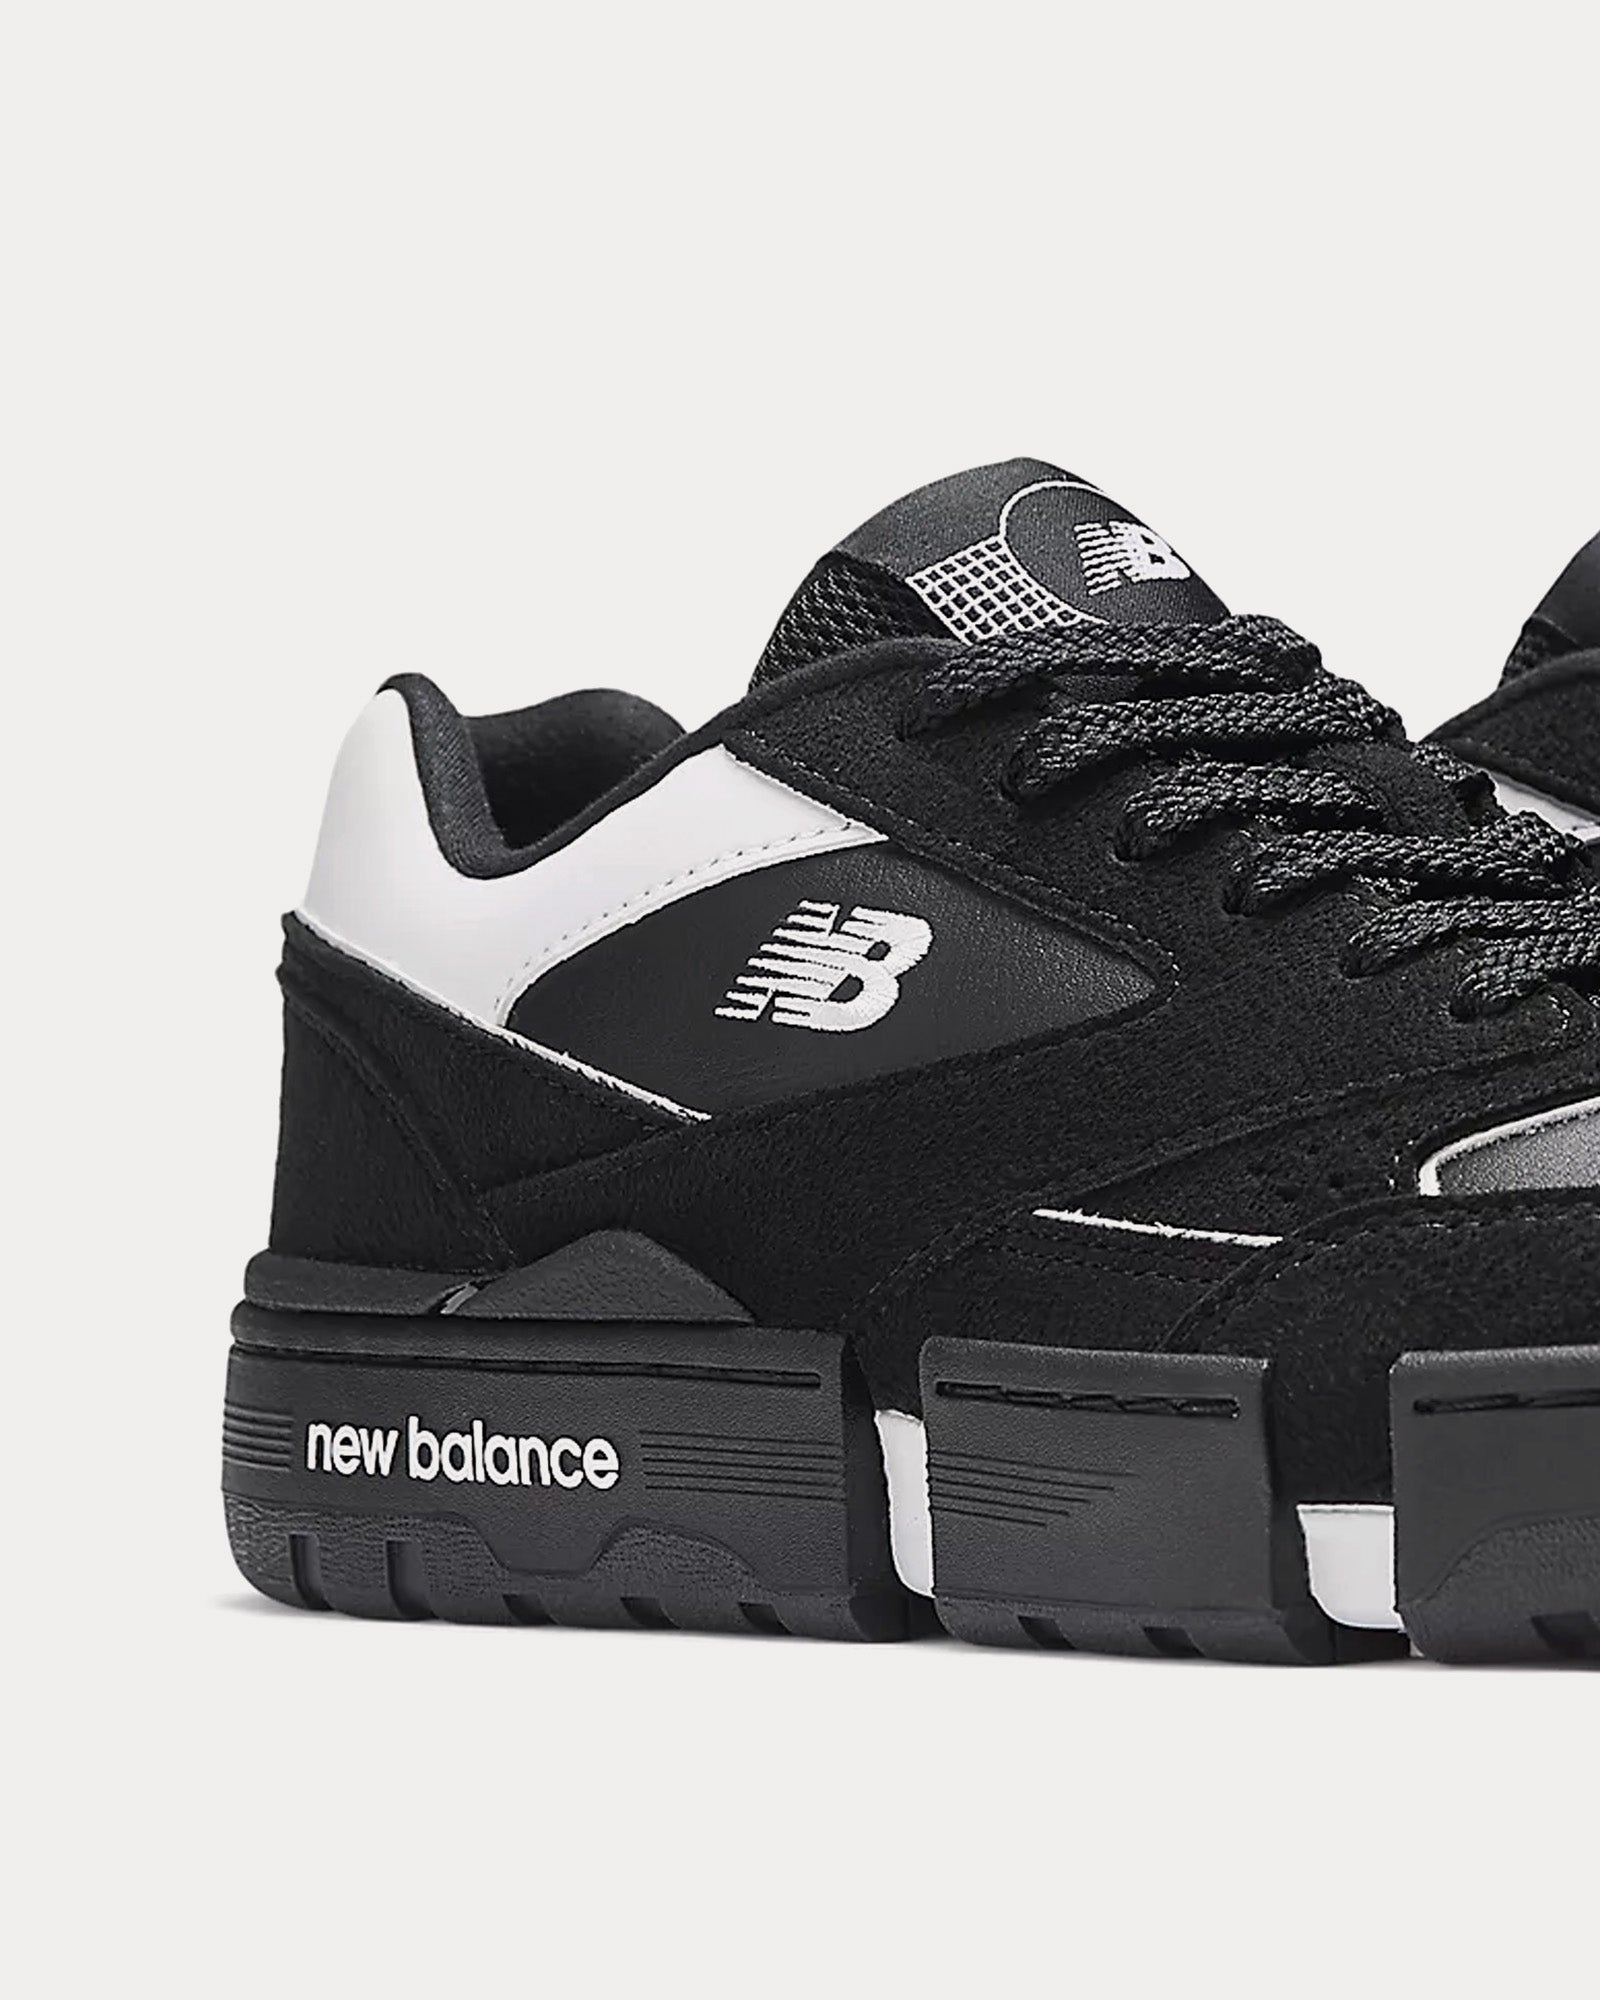 New Balance x MSFTrep - 0.01 Black / White Low Top Sneakers